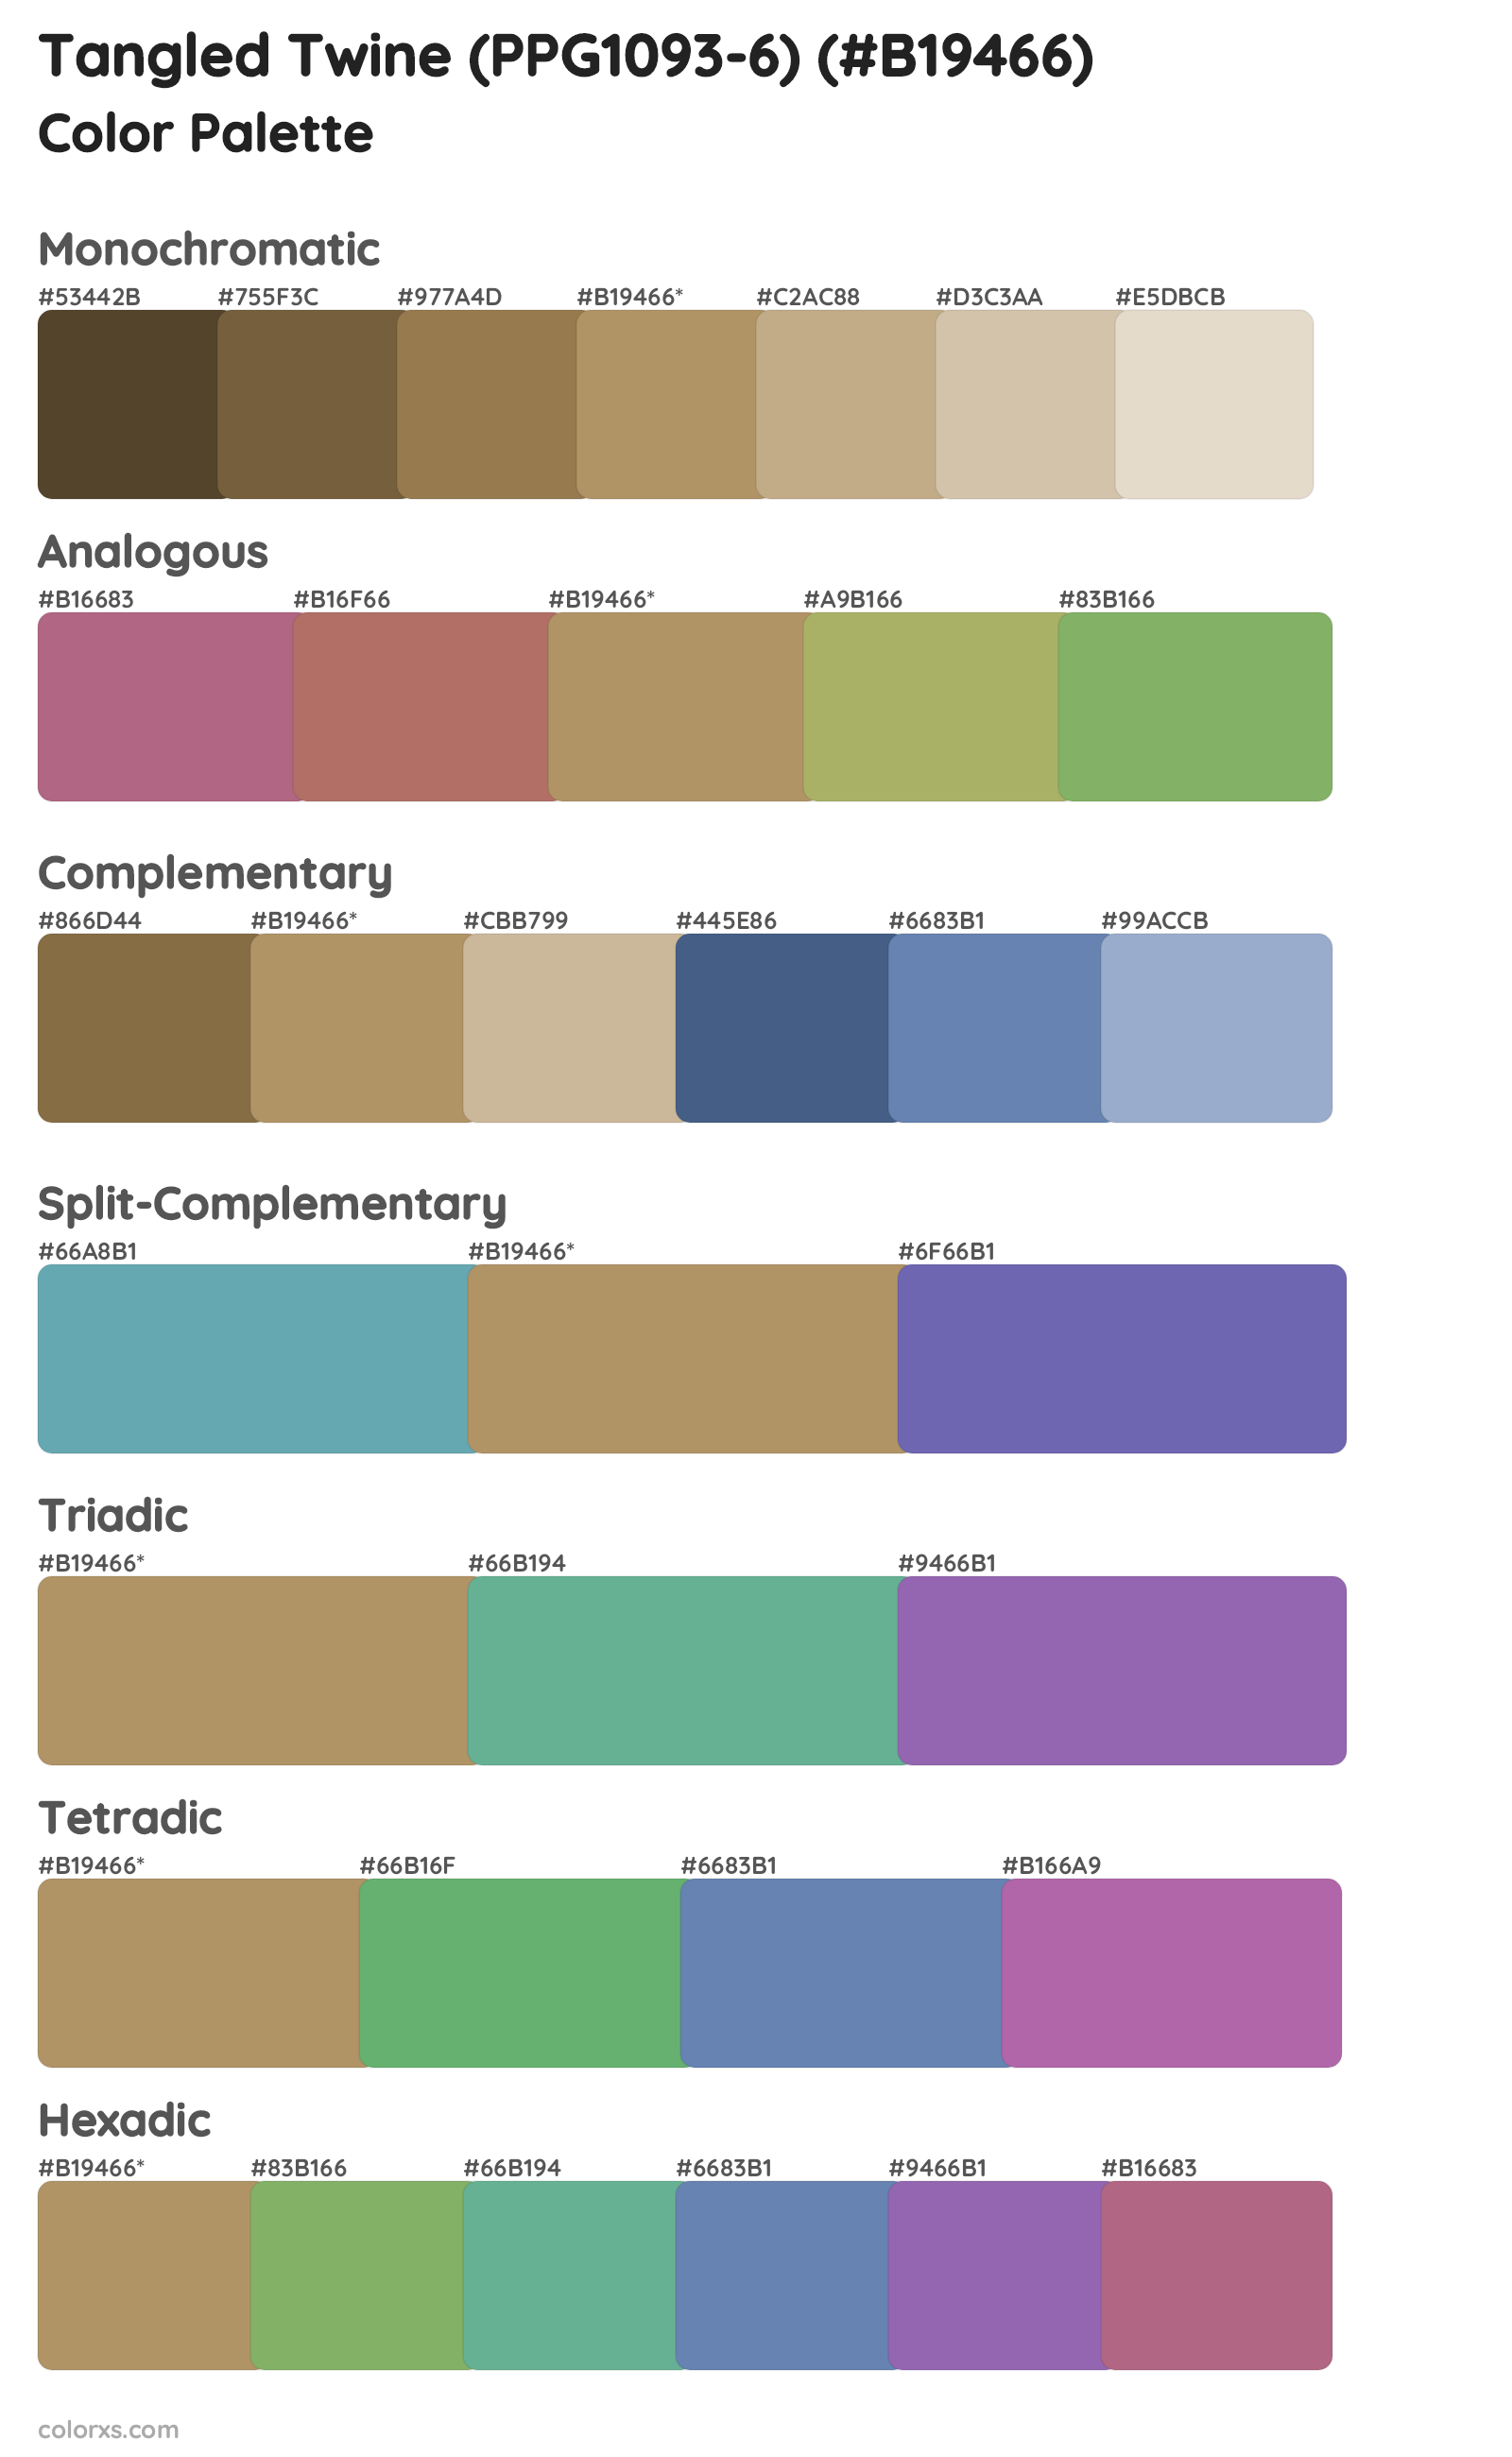 Tangled Twine (PPG1093-6) Color Scheme Palettes